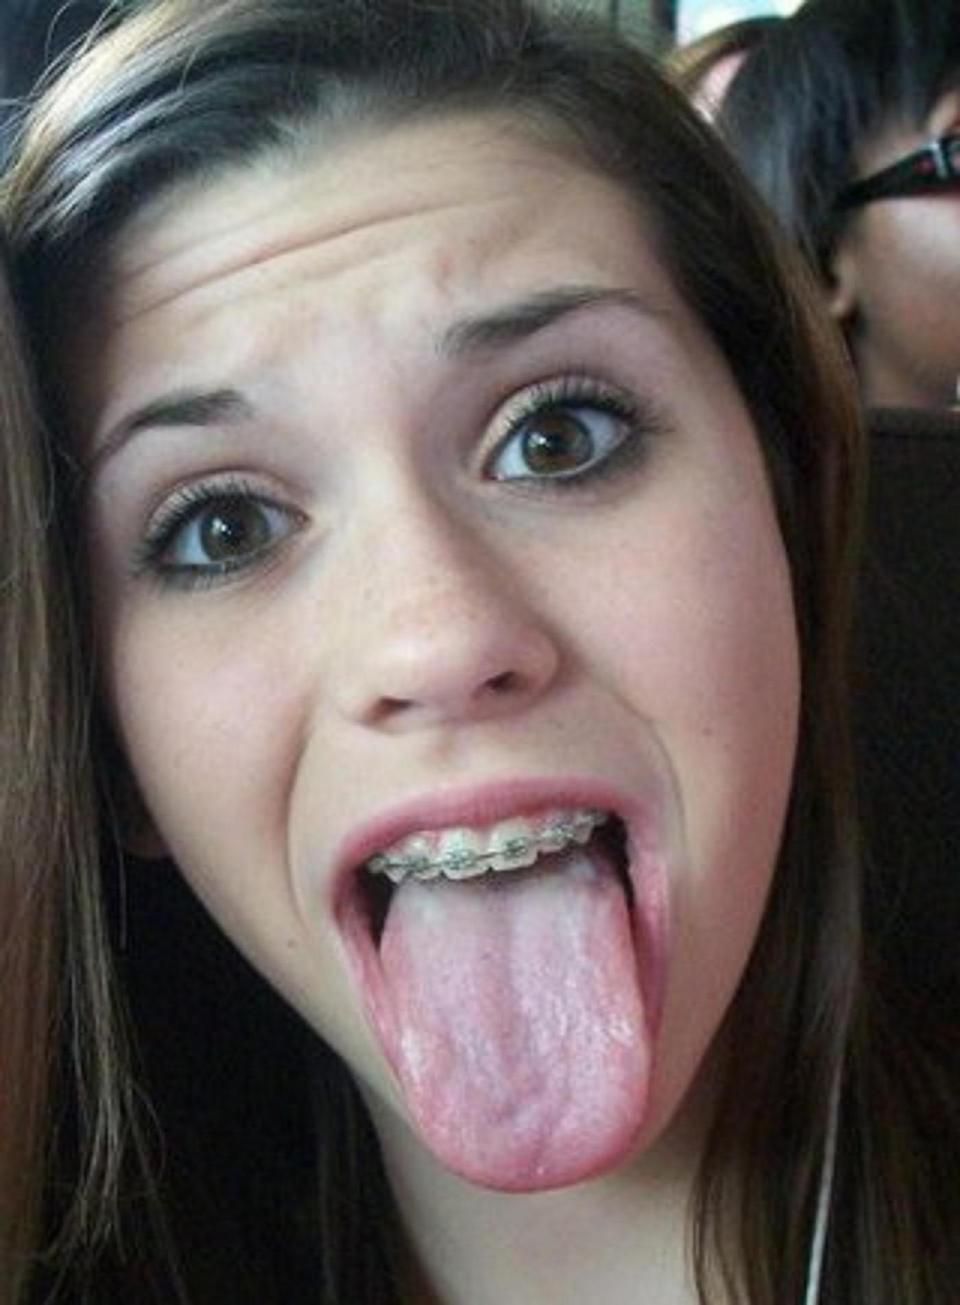 Girls with cum on tongue